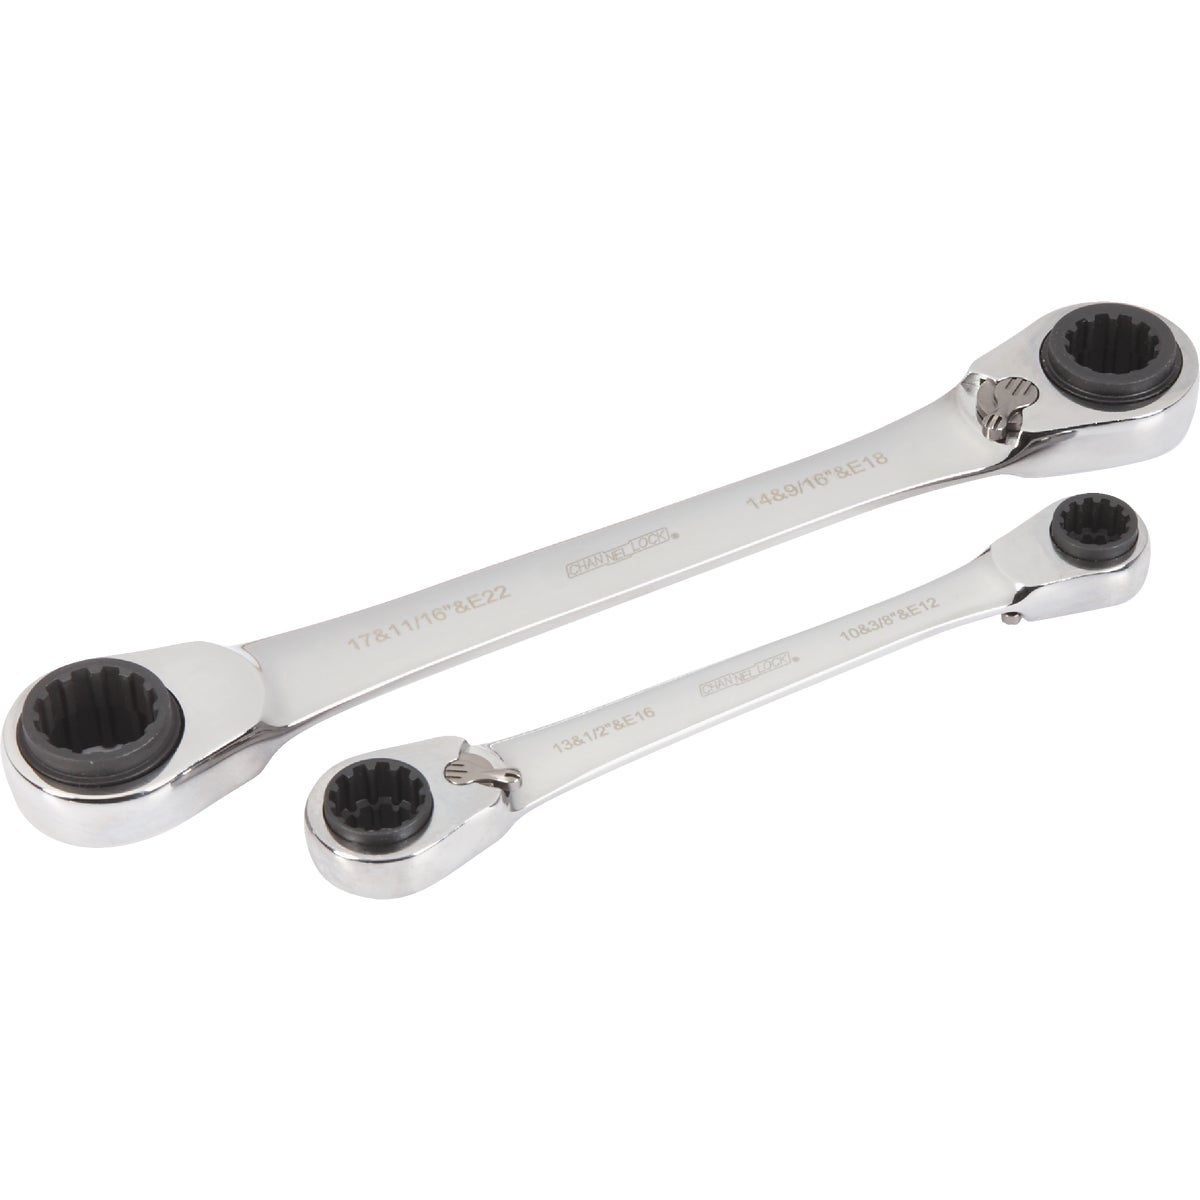 Item 302963, This 2-Piece 28-in-1 universal ratcheting box end wrench set is made from 